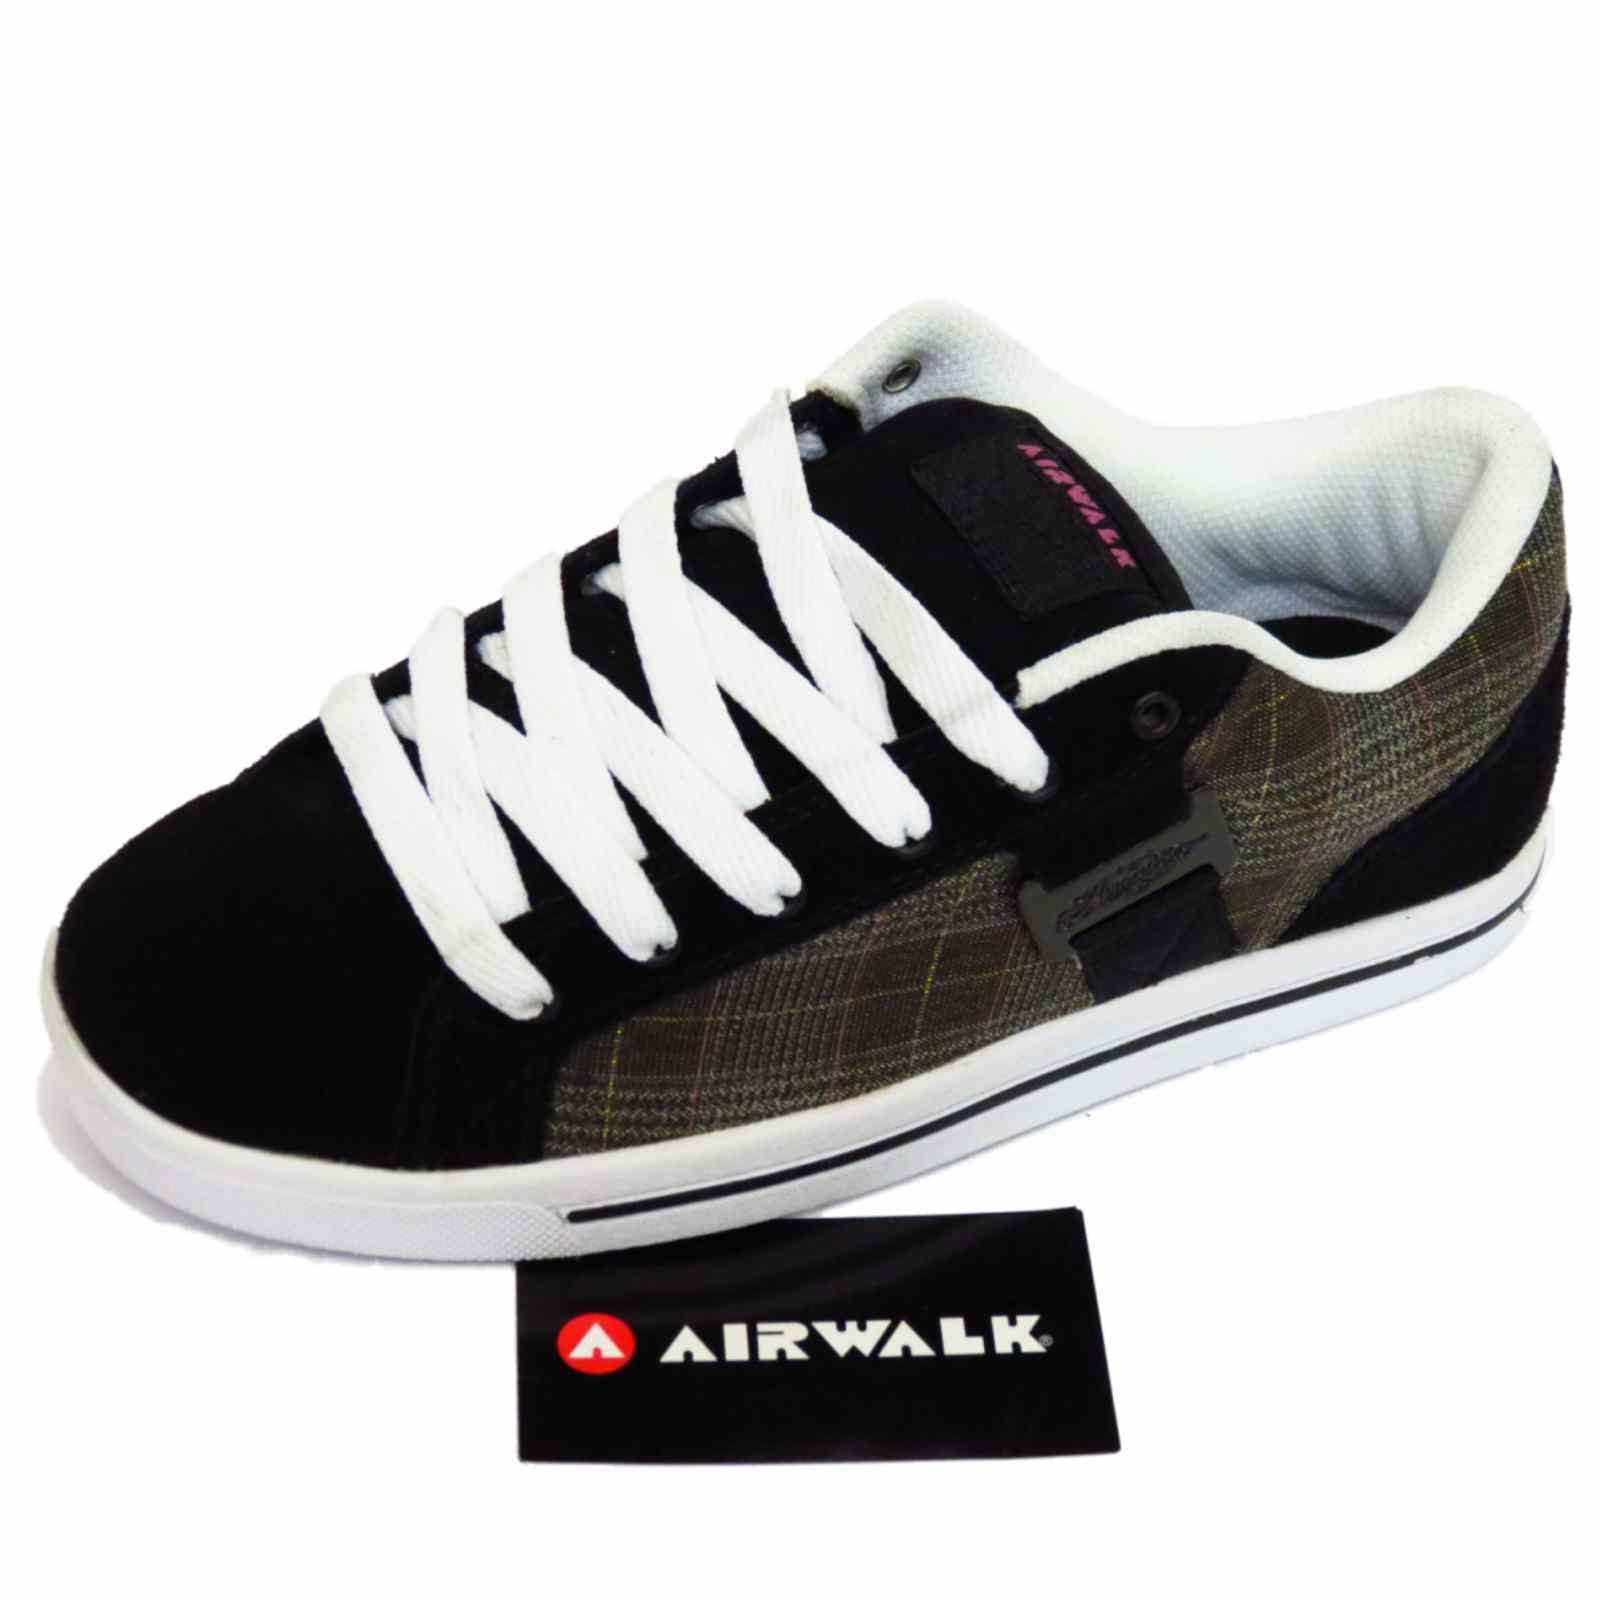 SKATER TRAINERS CASUAL SHOES PUMPS UK 